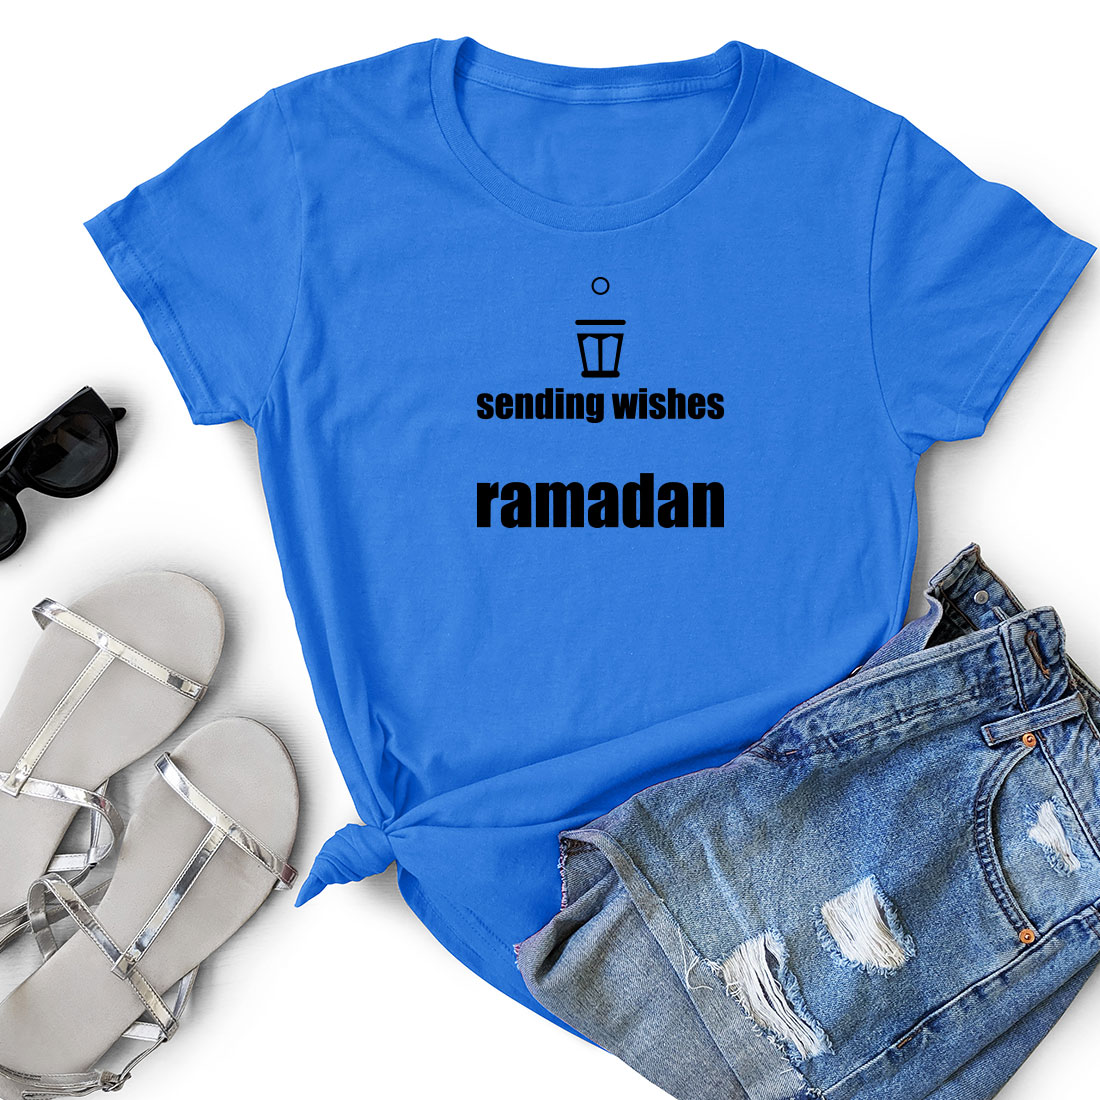 T - shirt that says sending wishes is ramaan.